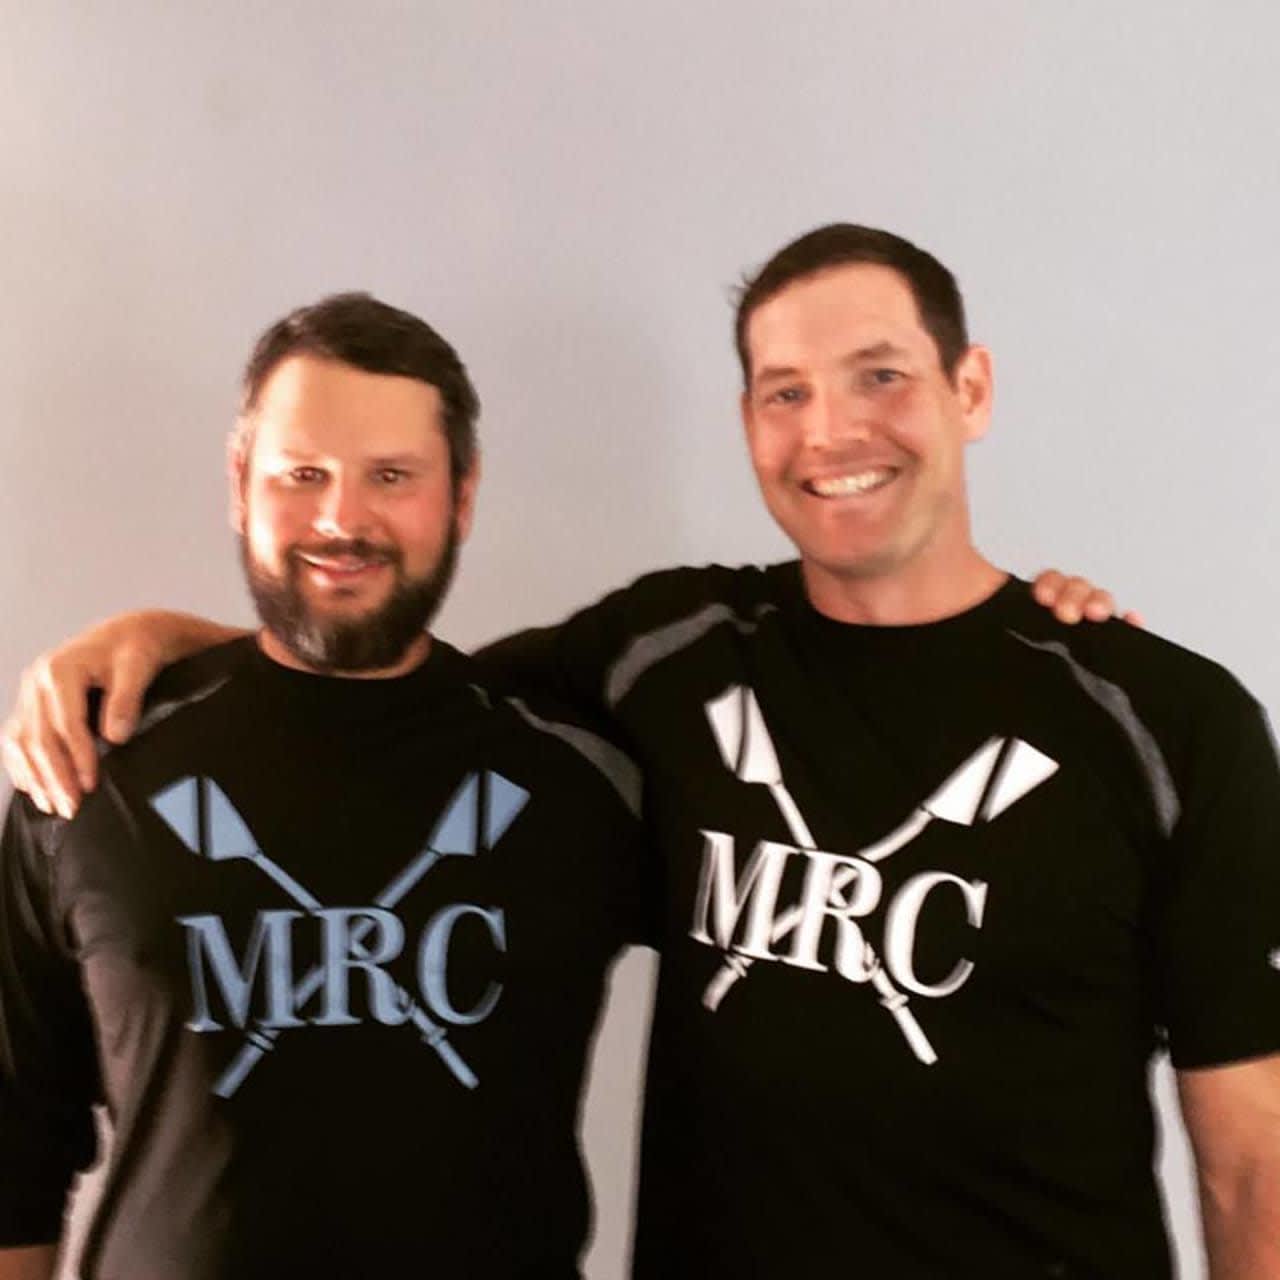 Dan Walsh, right, will join his longtime friend, Roman Vengerovskiy, at Maritime Rowing Club in Norwalk. Walsh won a bronze medal in the Summer Olympics in 2008.